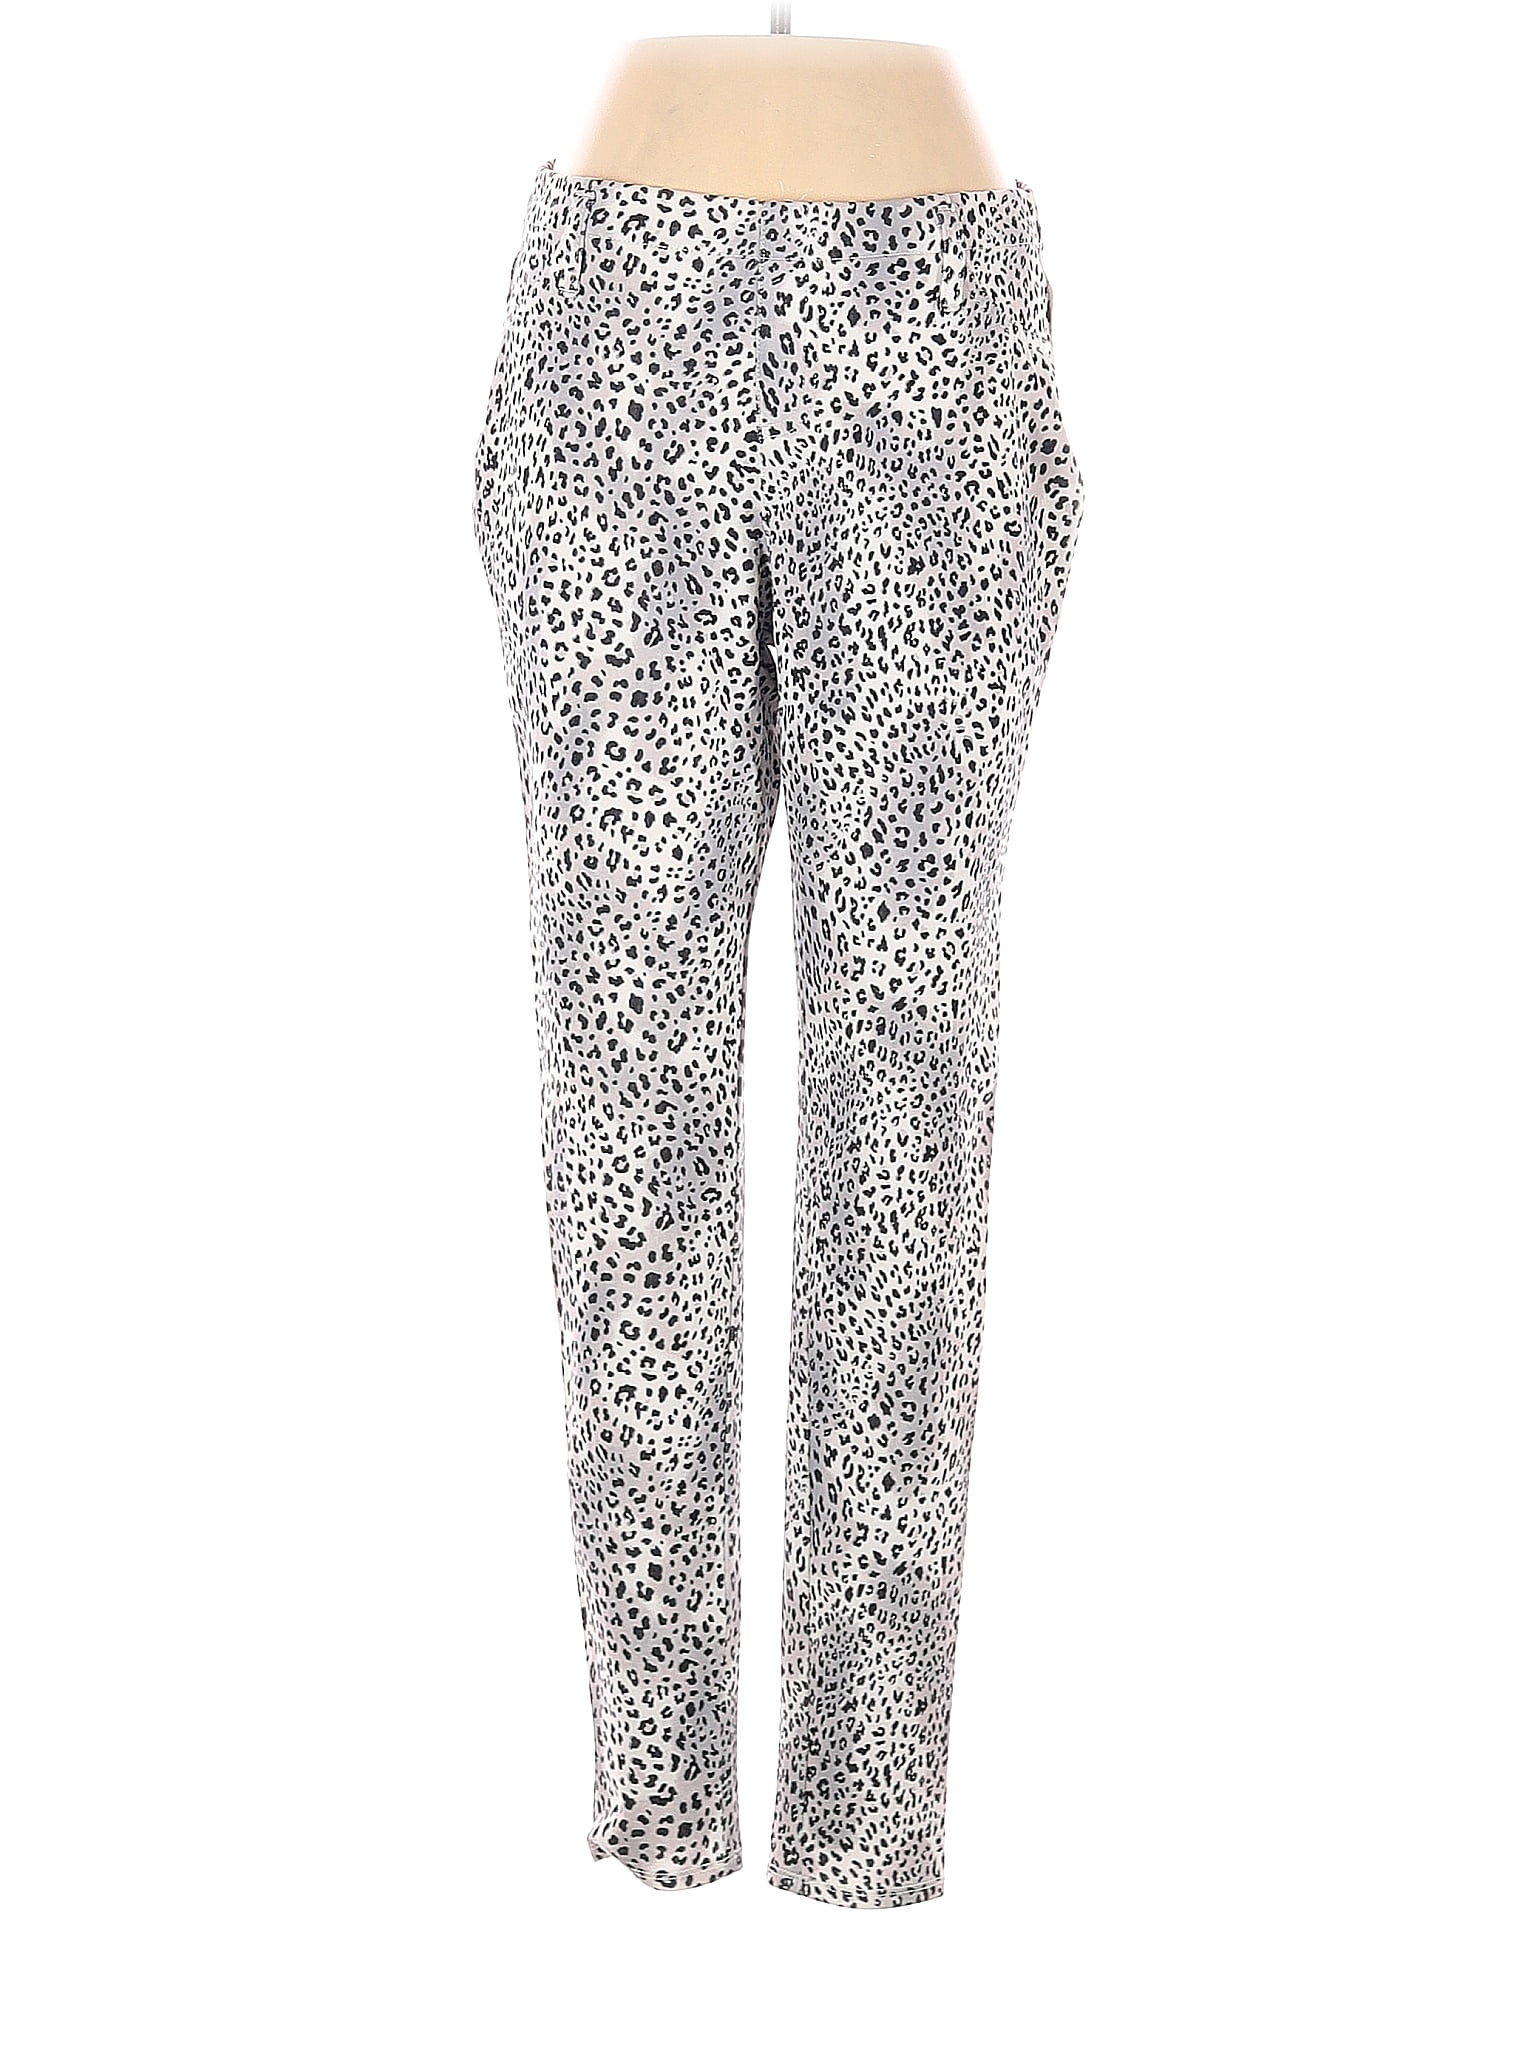 Faded Glory Silver Printed Jeggings Size M - $12 - From Valerie